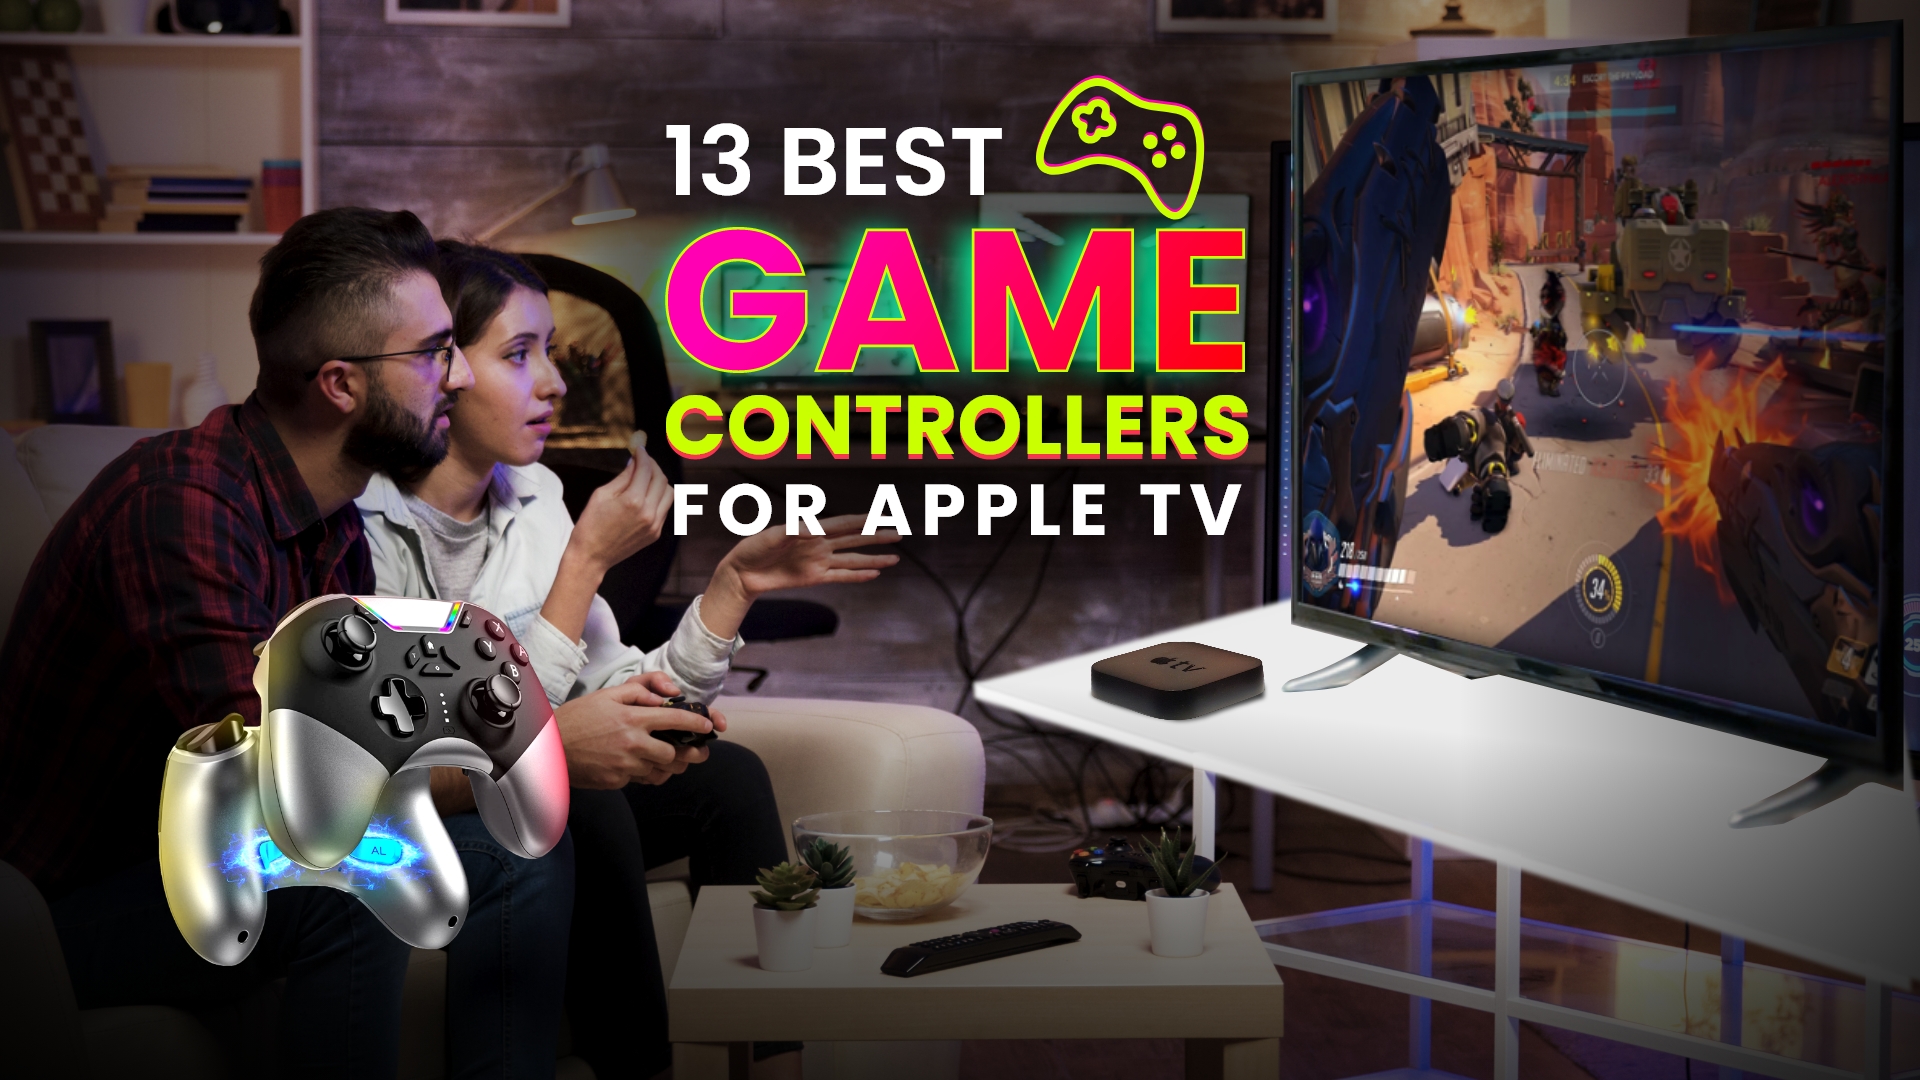 10 Best Game Controllers for Apple TV in 2022